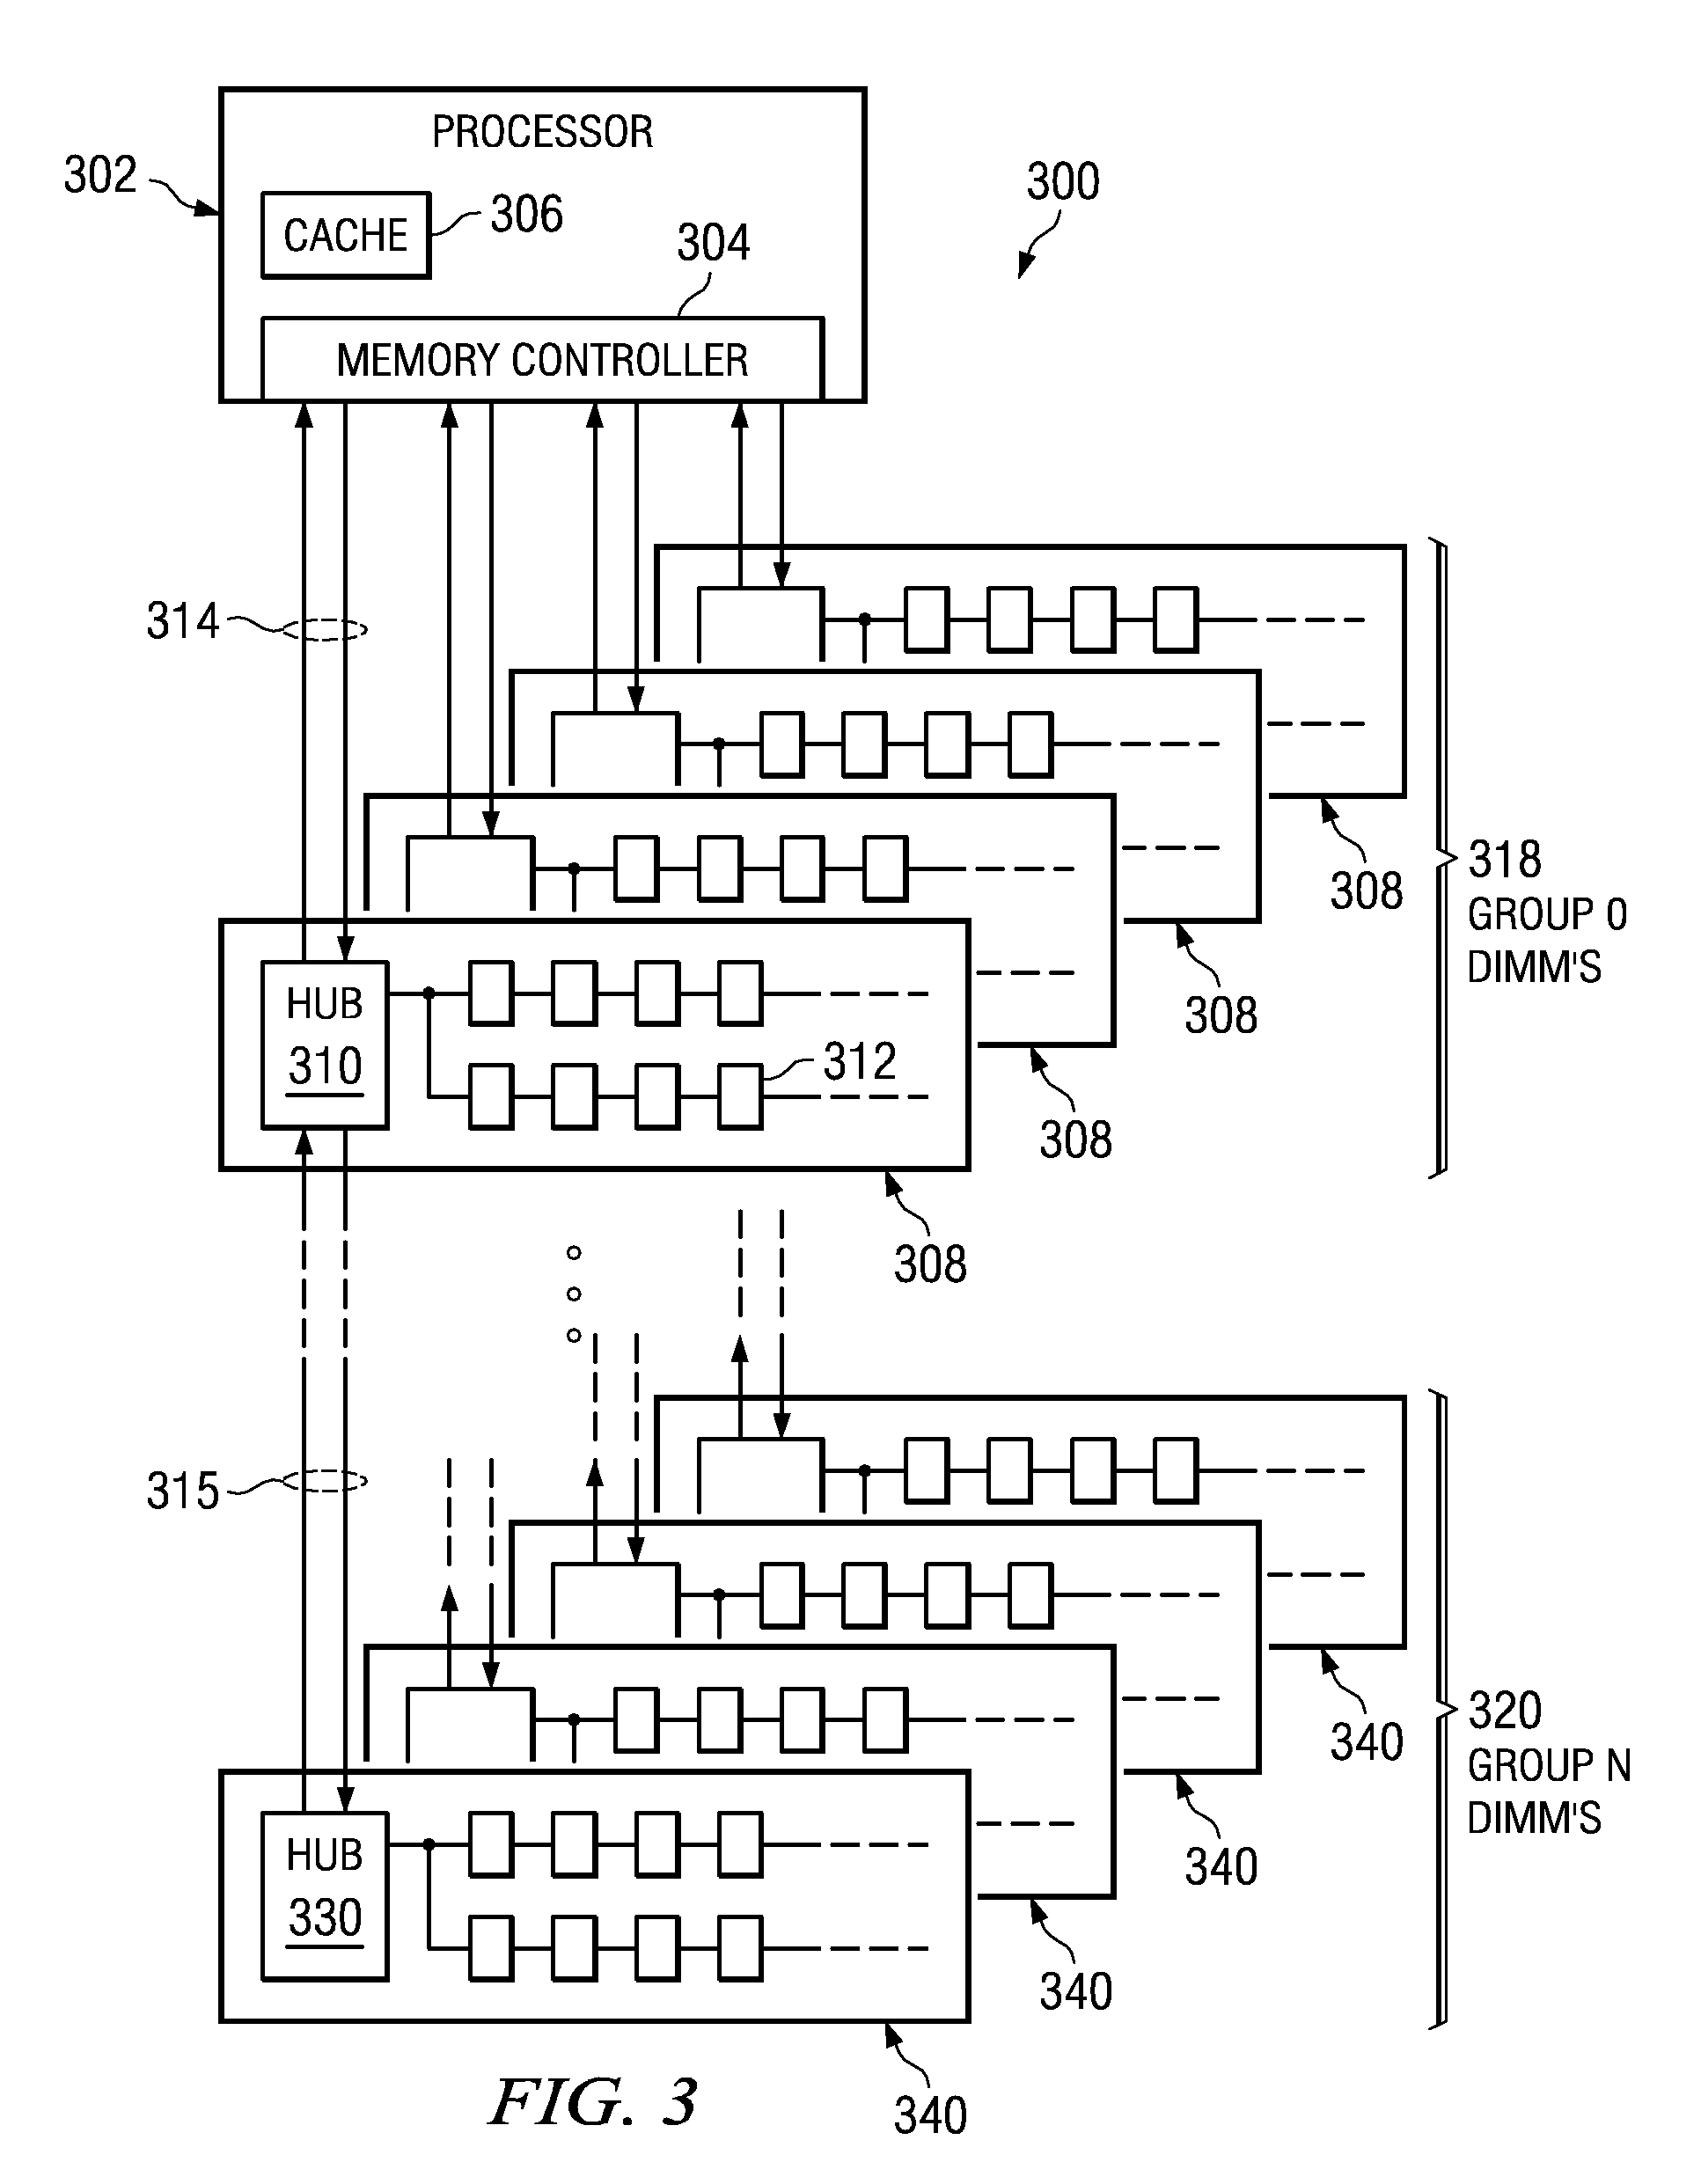 System for a Combined Error Correction Code and Cyclic Redundancy Check Code for a Memory Channel